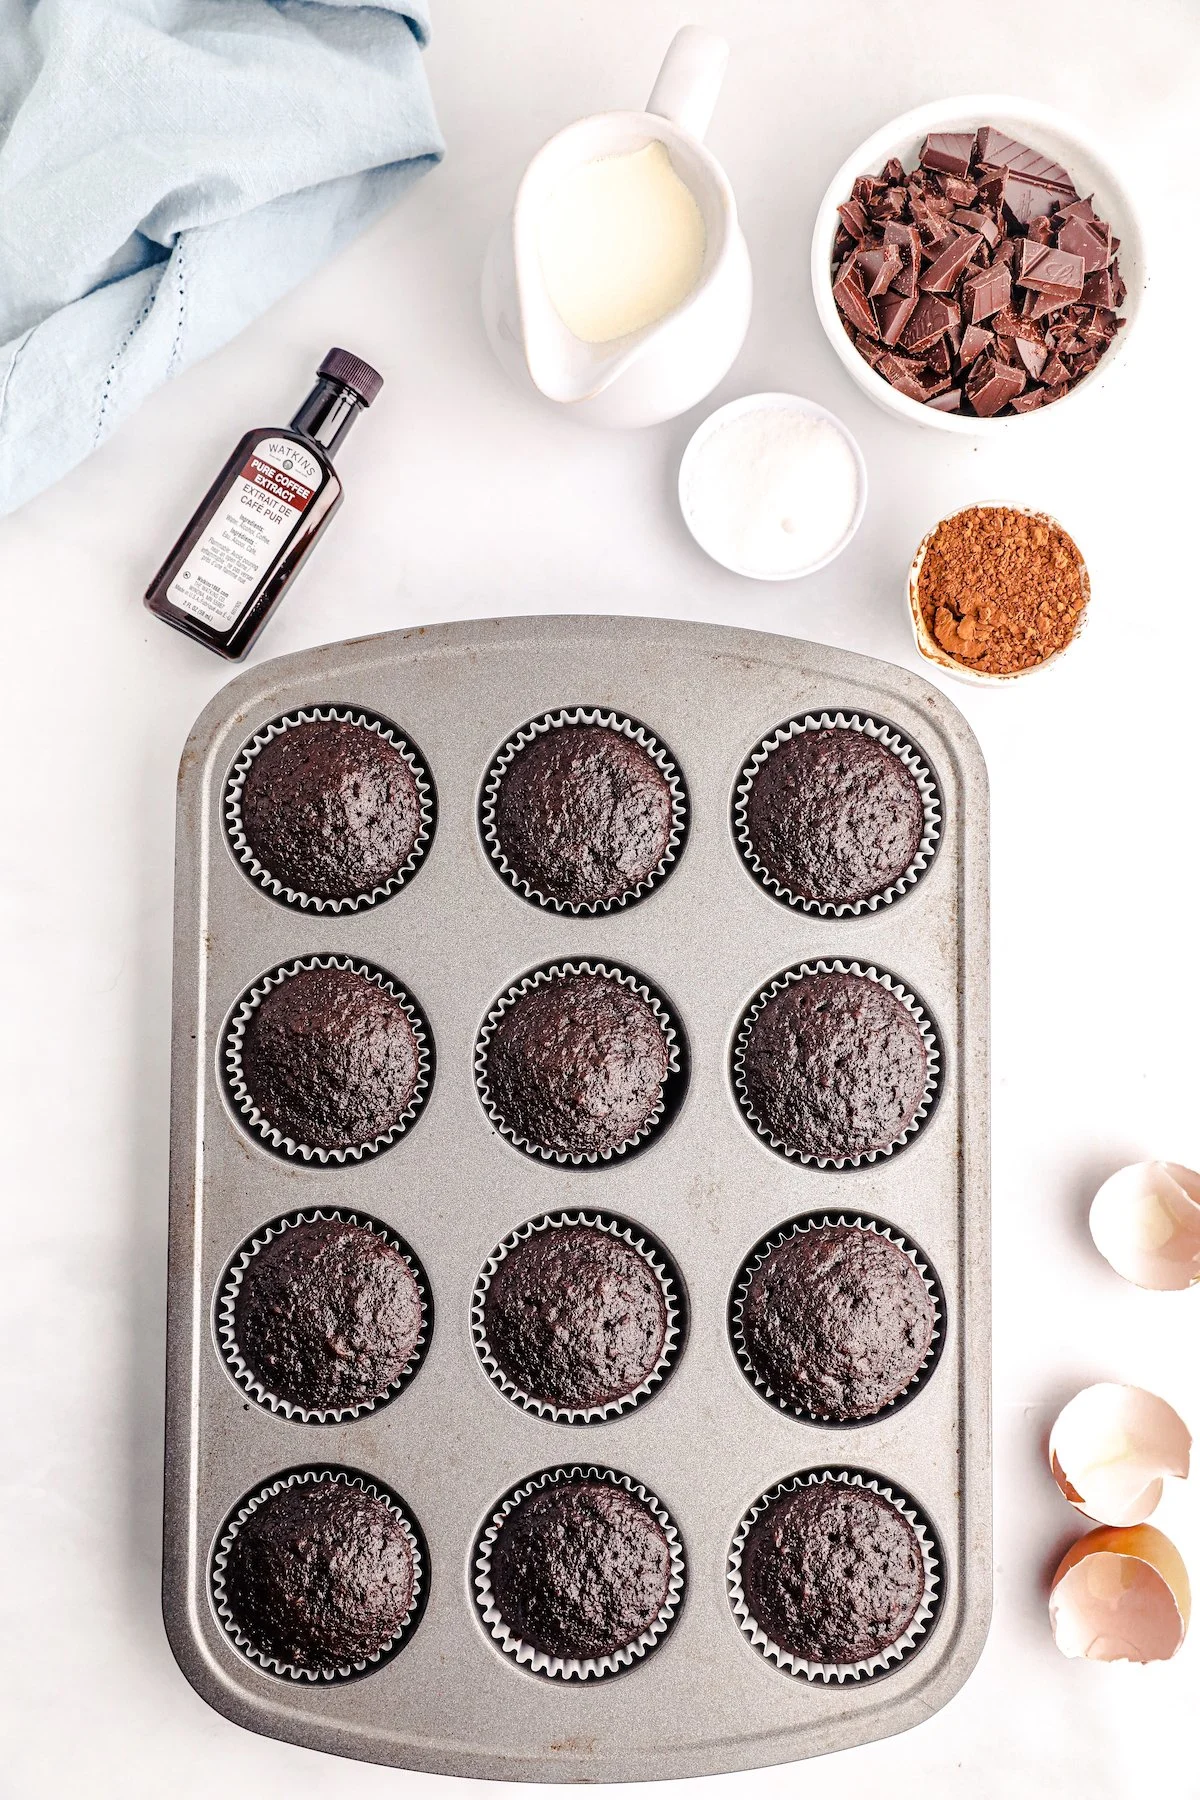 freshly baked chocolate cupcakes out of the oven in a muffin tin. Various ingredients scattered around the tin.